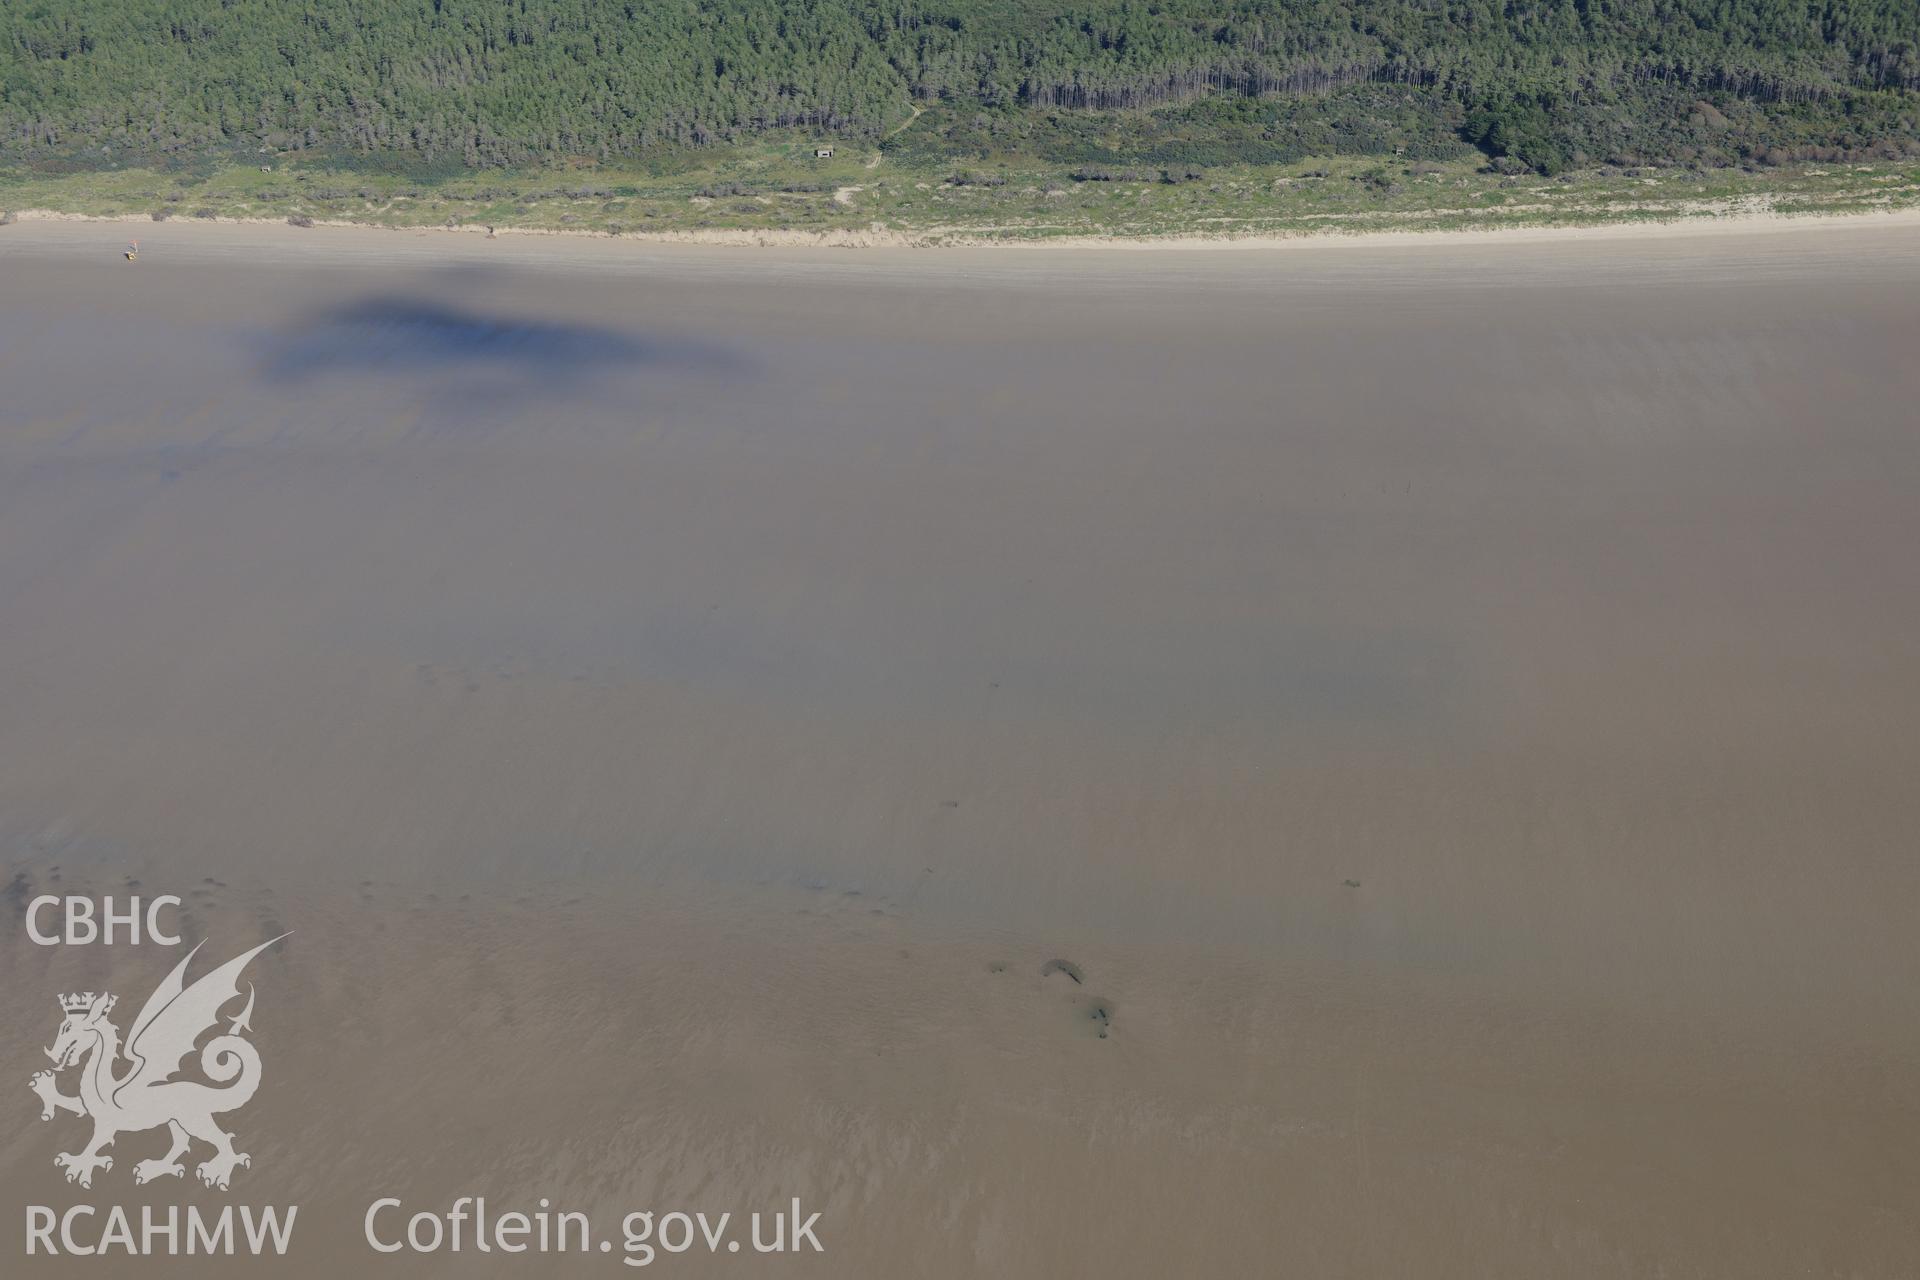 Post medieval wreck on the Cefn Sidan sands, Pembrey, at low tide. Oblique aerial photograph taken during the Royal Commission's programme of archaeological aerial reconnaissance by Toby Driver on 30th September 2015.